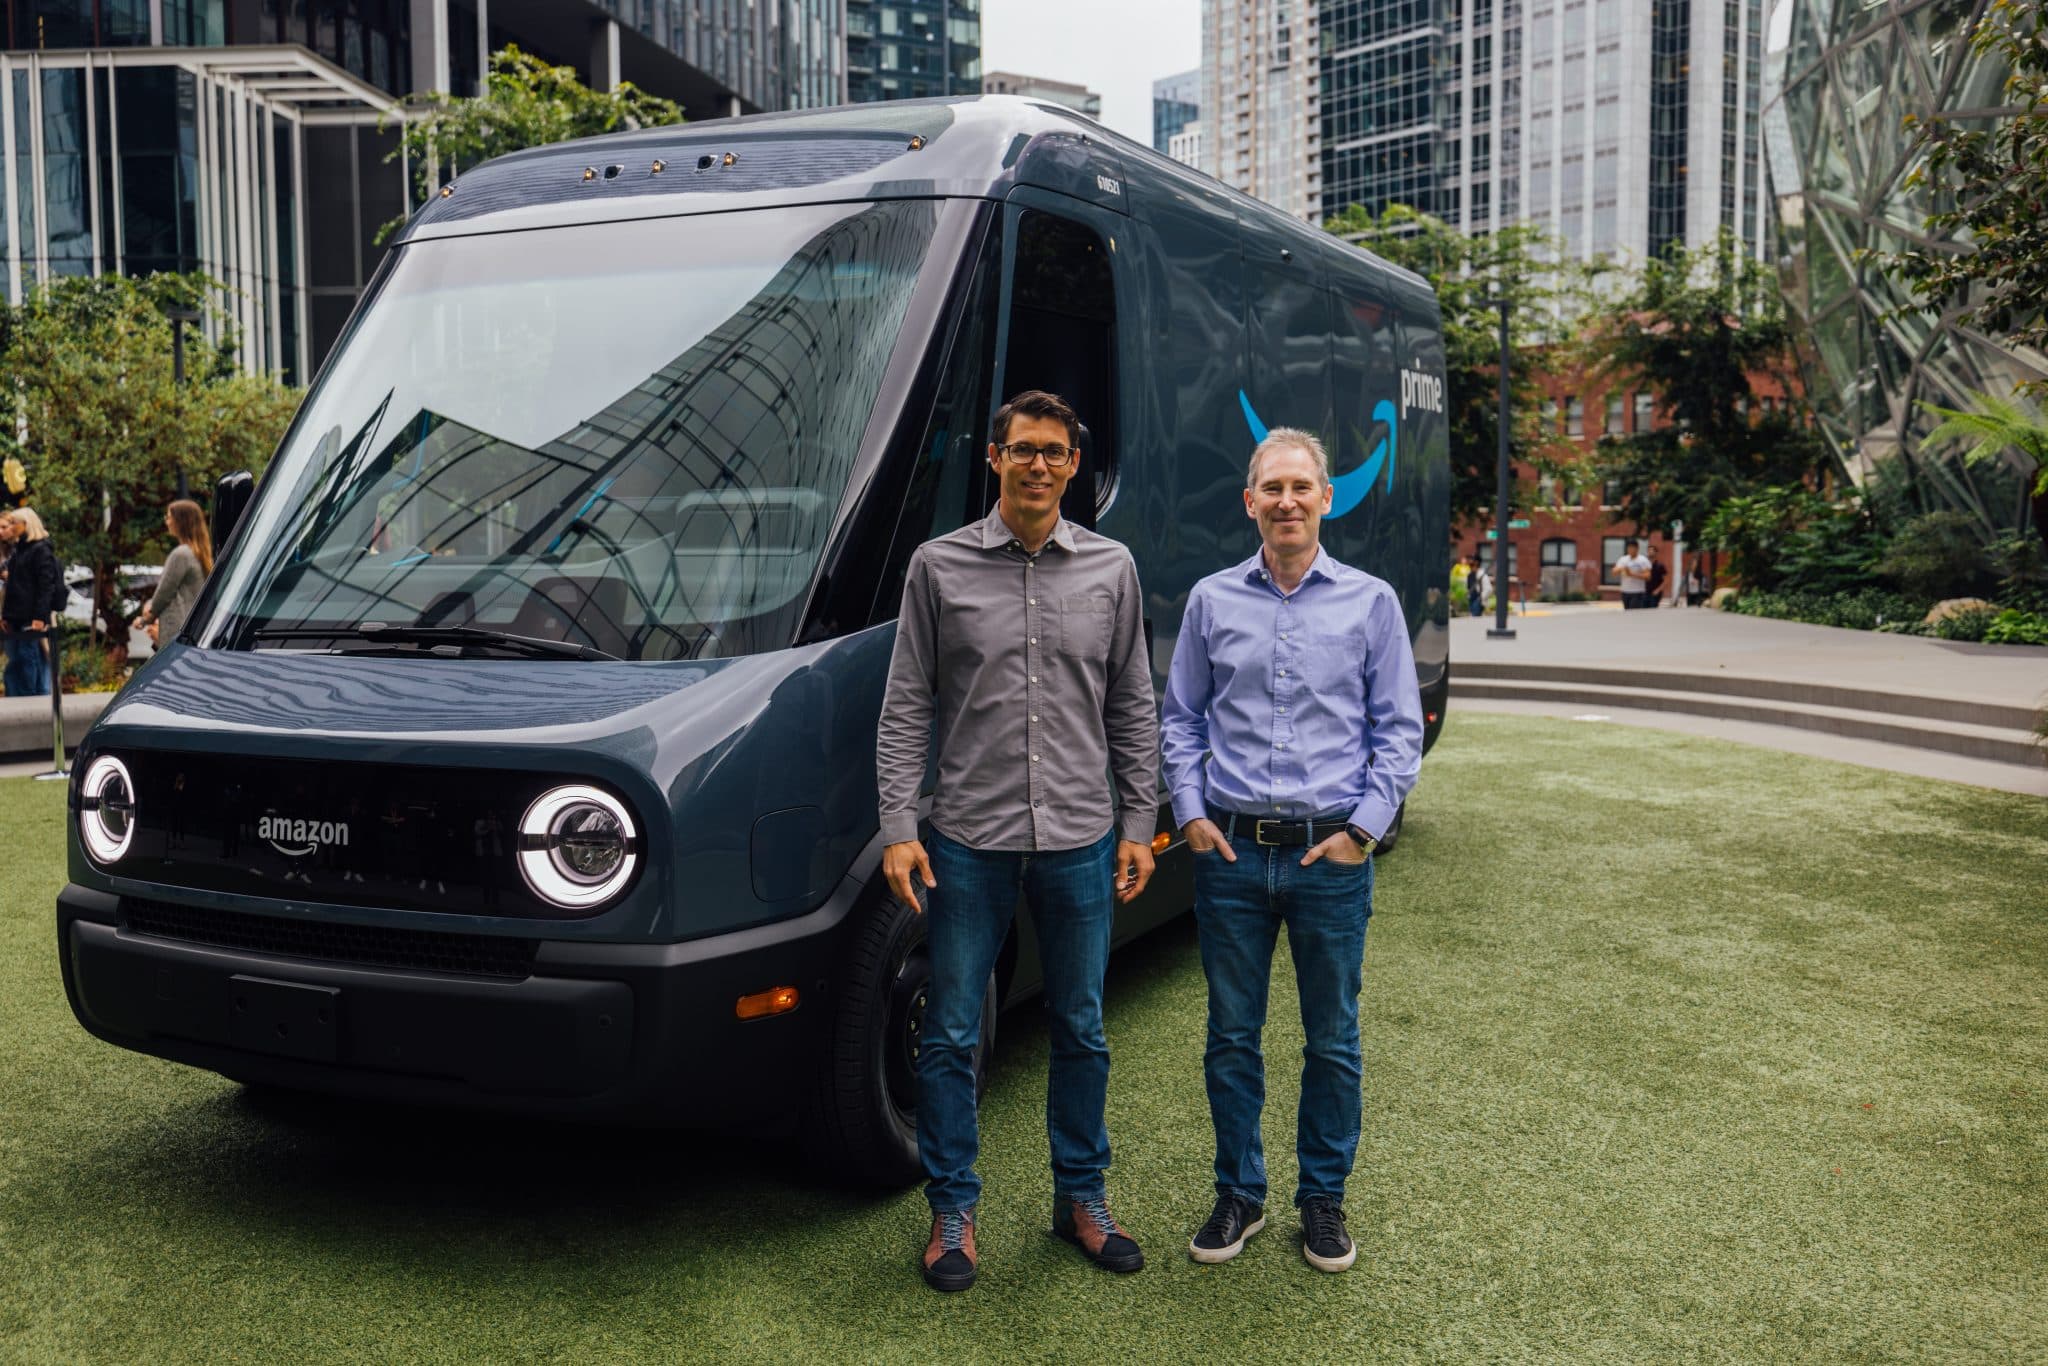 Amazon rolls out electric delivery vans built by Rivian